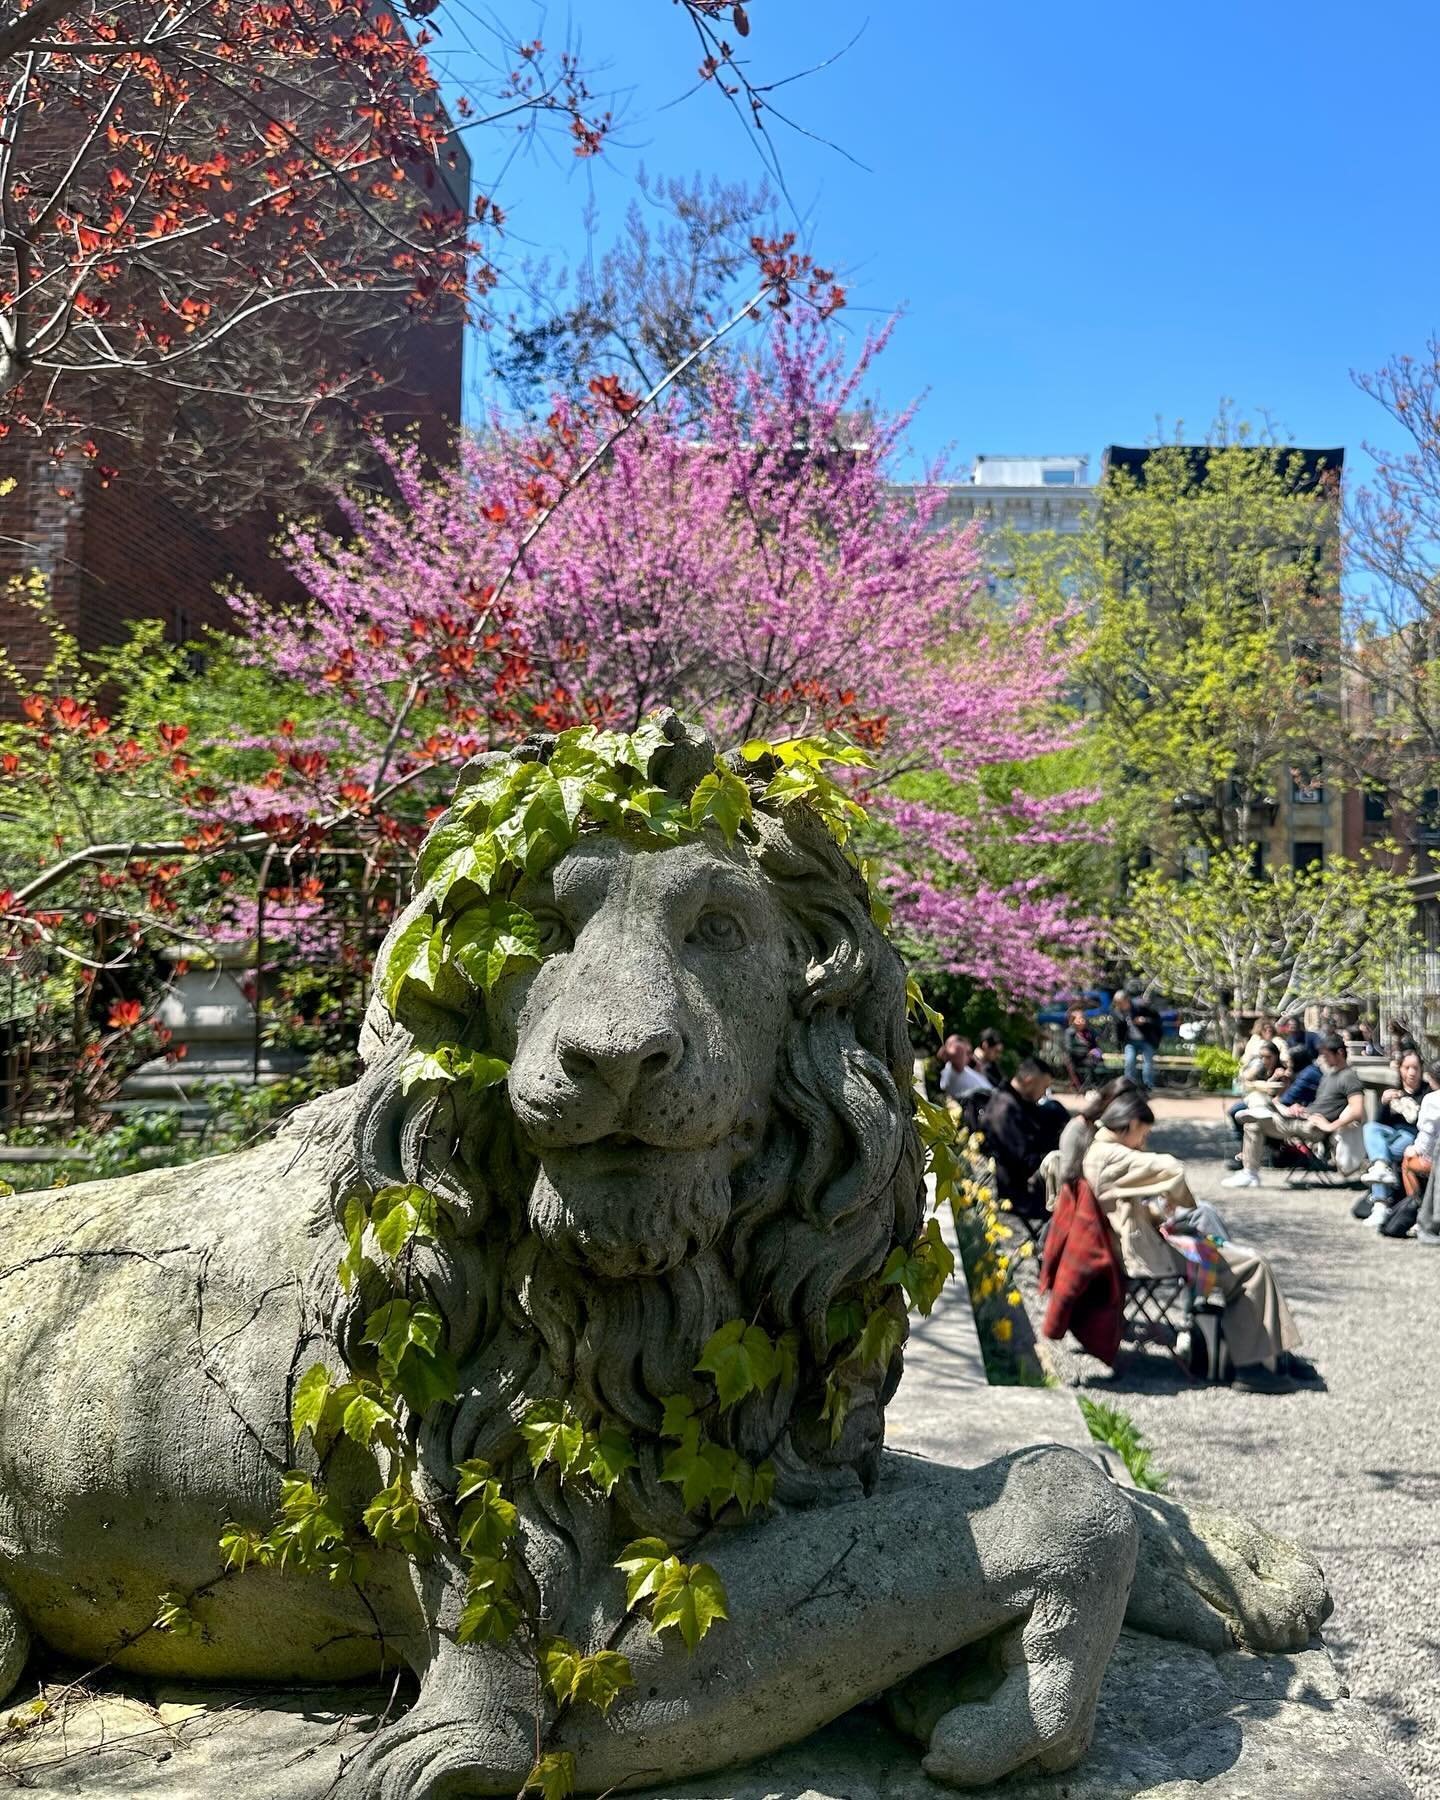 Happy Friday from the garden! 

Have you read our proposal to @nycmayor yet? 
We personally handed the Mayor a solution that achieves more affordable housing in the district &amp; preserves ESG as a Conservation Land Trust. 

Swipe for more info &amp